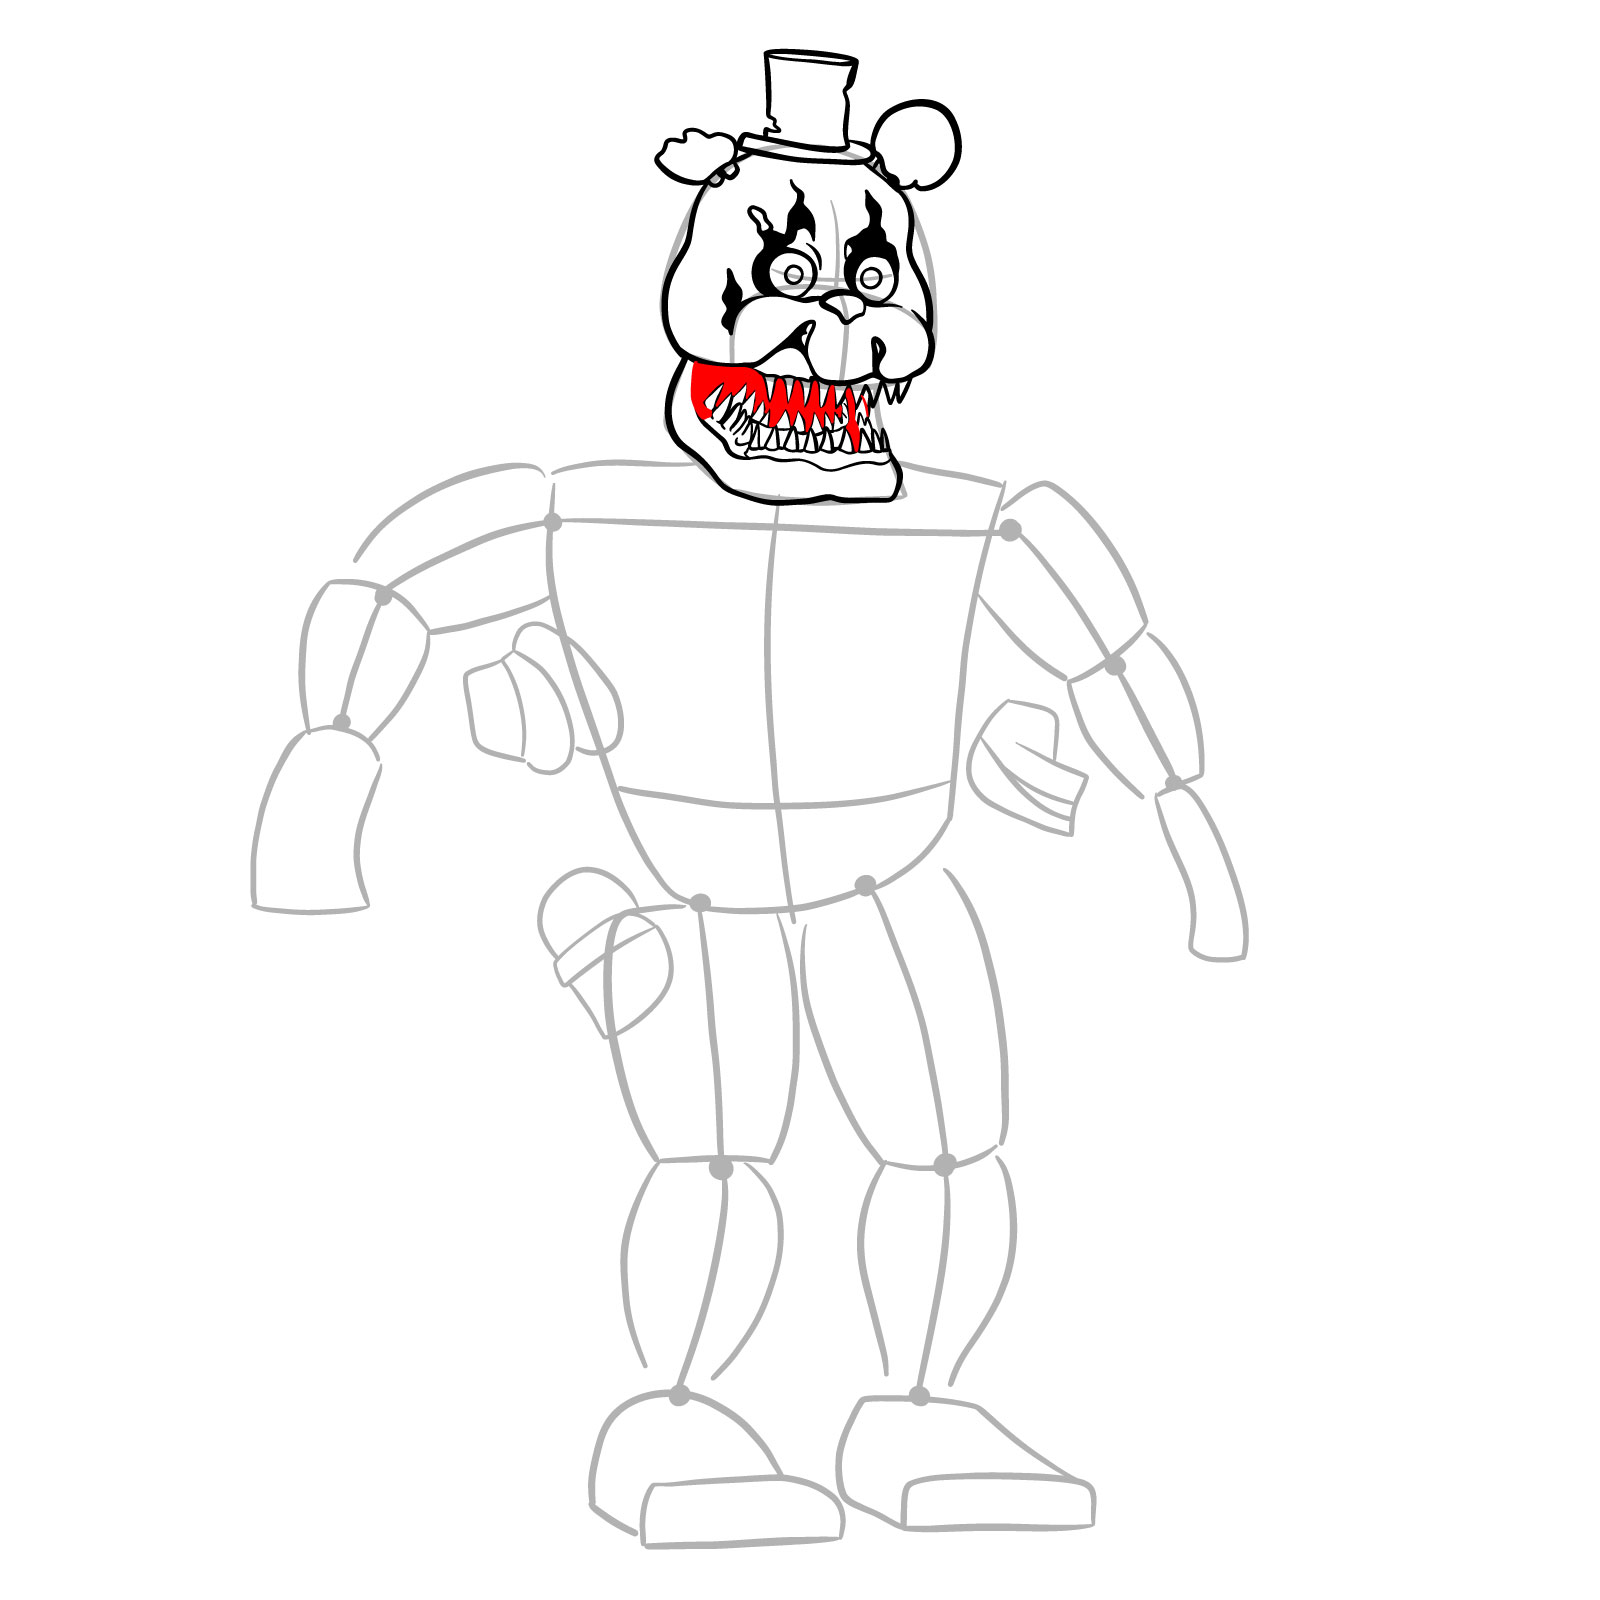 How to draw Nightmare Freddy - step 15